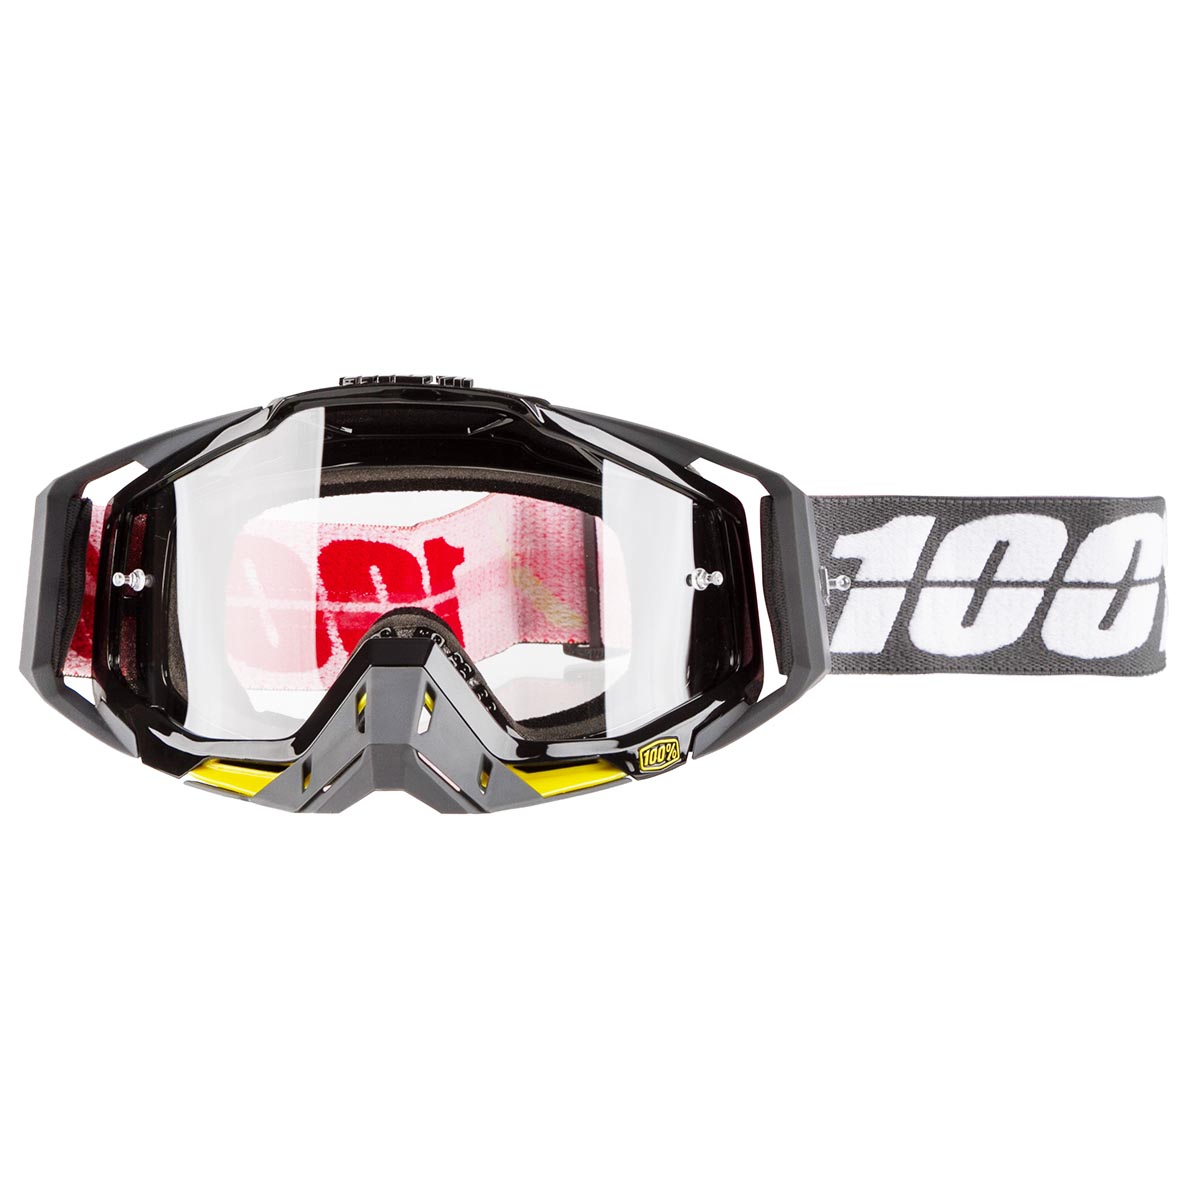 100% Goggle The Racecraft Fortis - Clear Anti-Fog